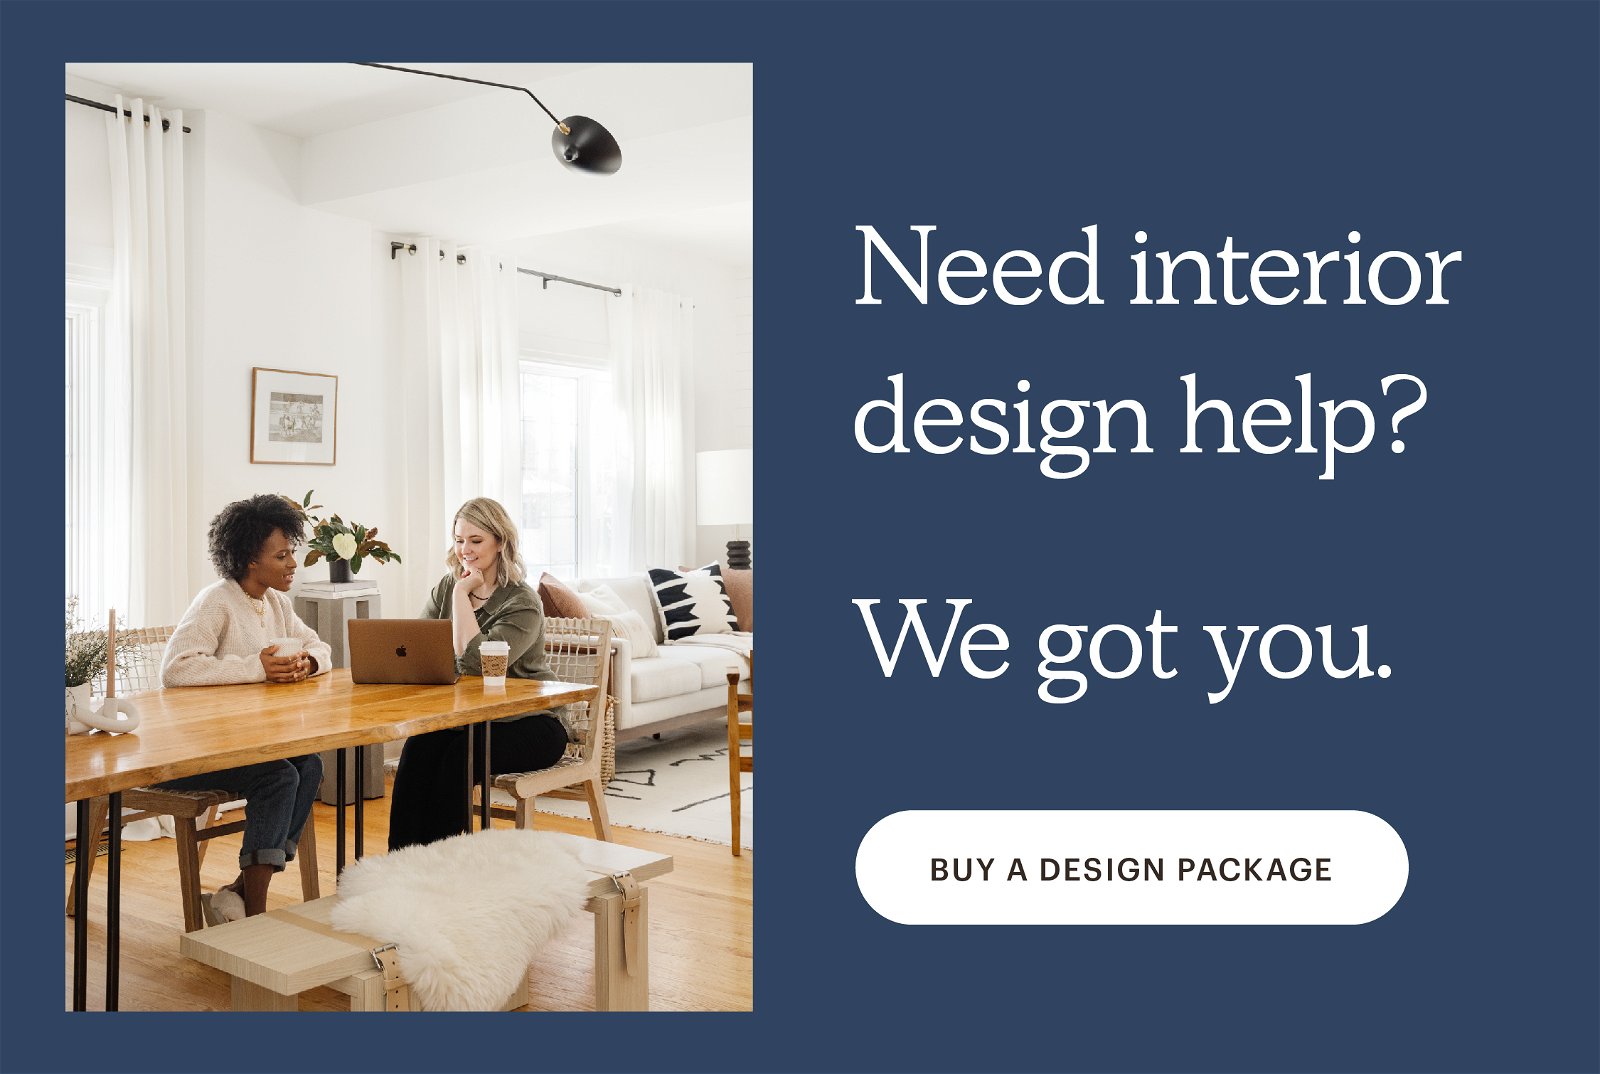 Buy A Design Package